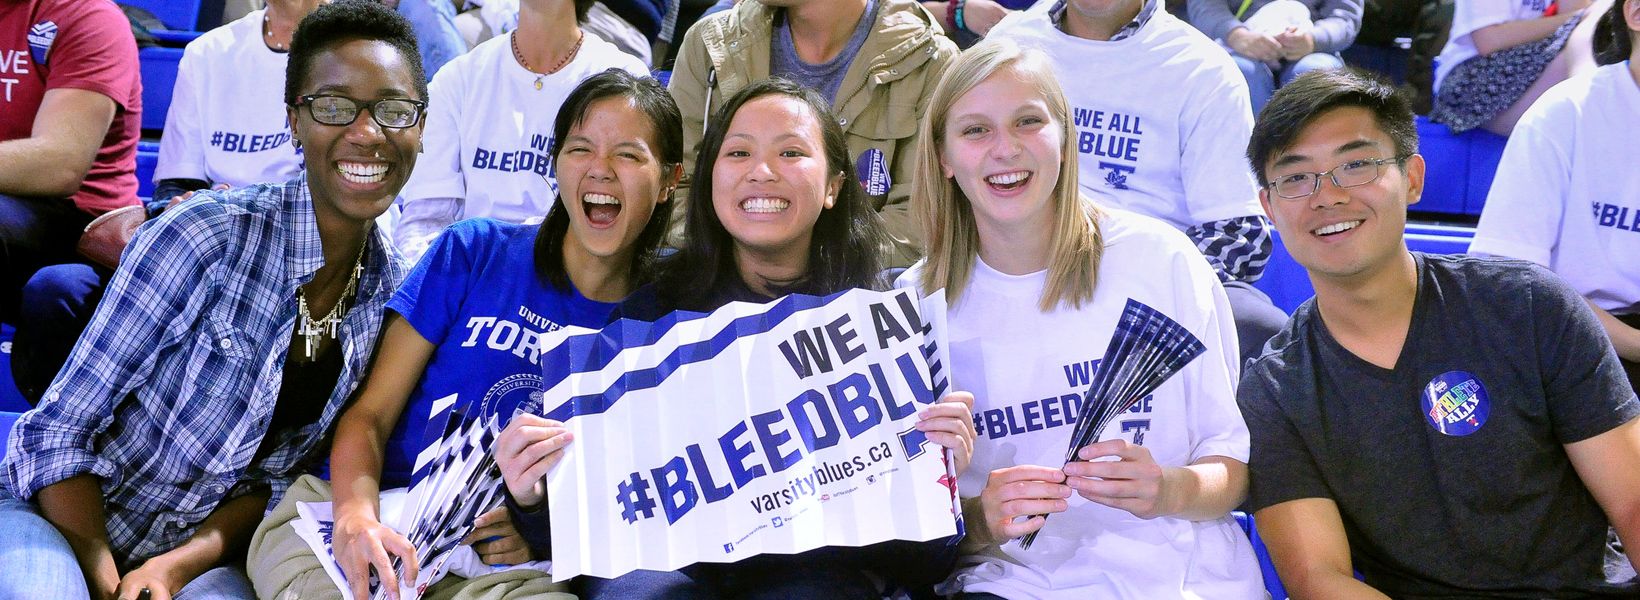 varsity blues fans at a sporting event